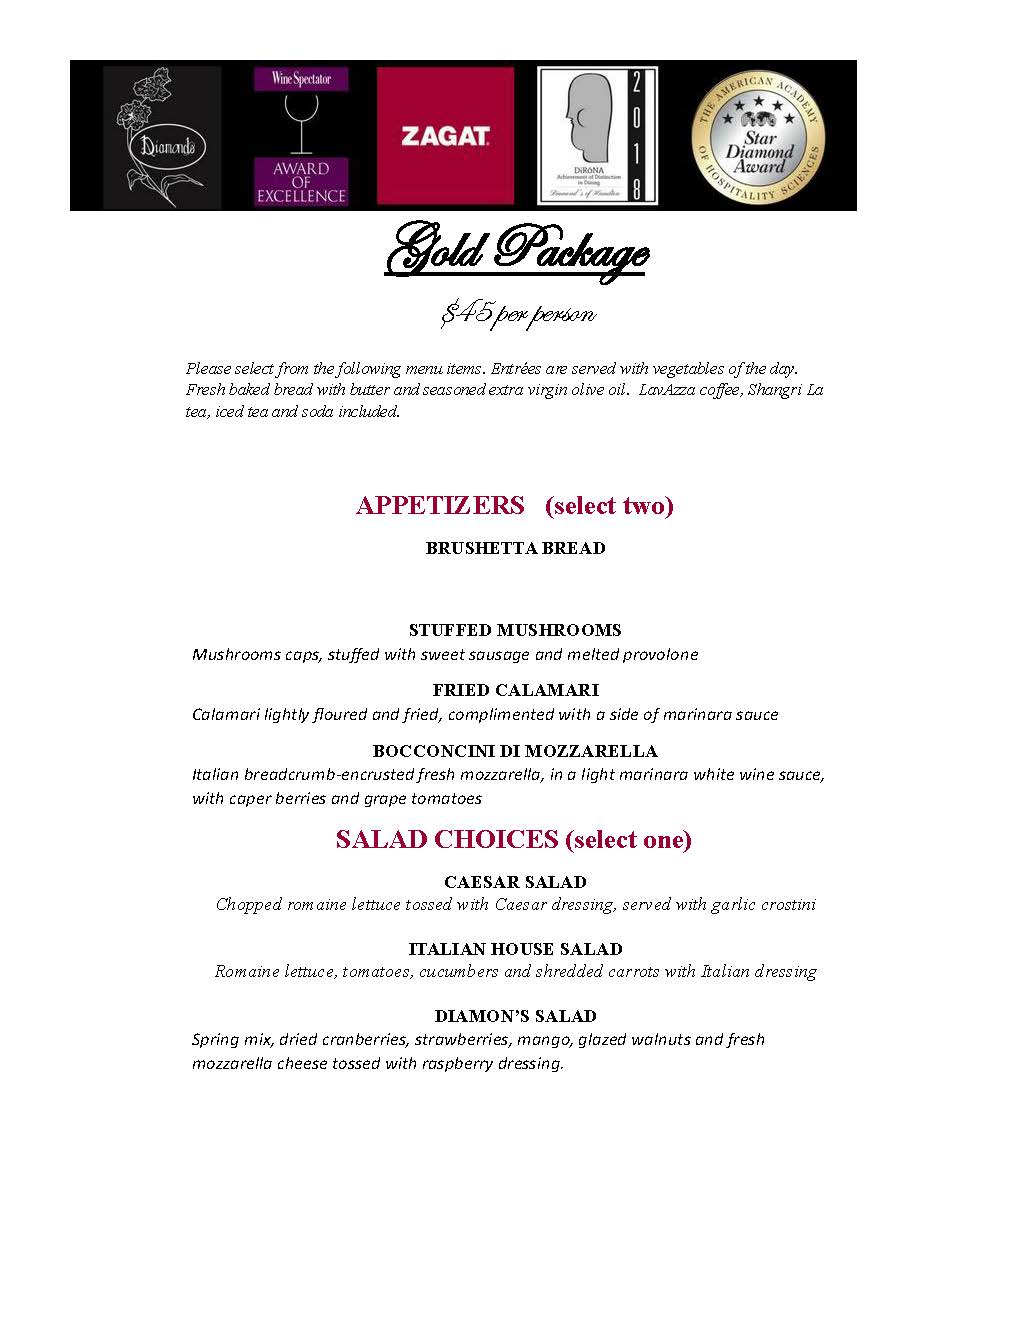 Menu page titled "gold package," featuring a variety of appetizers, entrees, and desserts with elegant fonts and award badges on top.